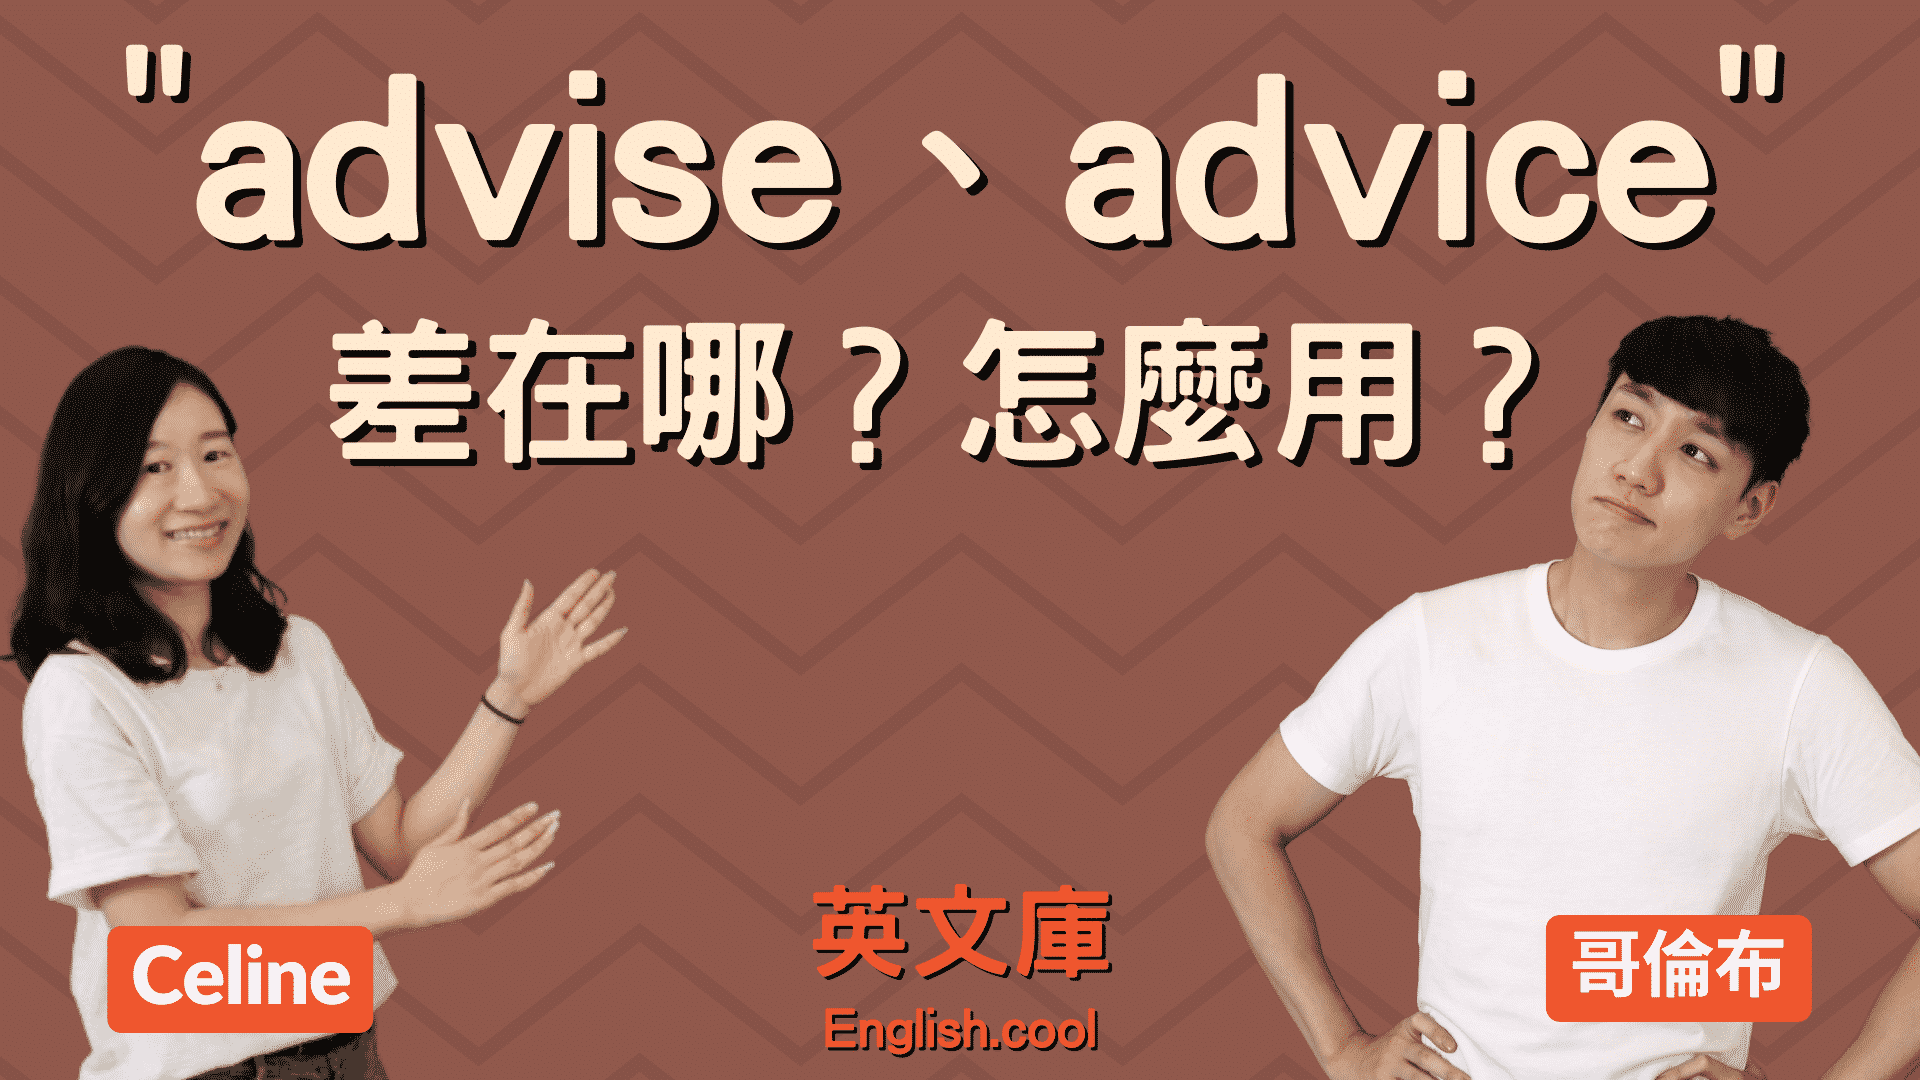 You are currently viewing advise、advice 差在哪？正確用法是？